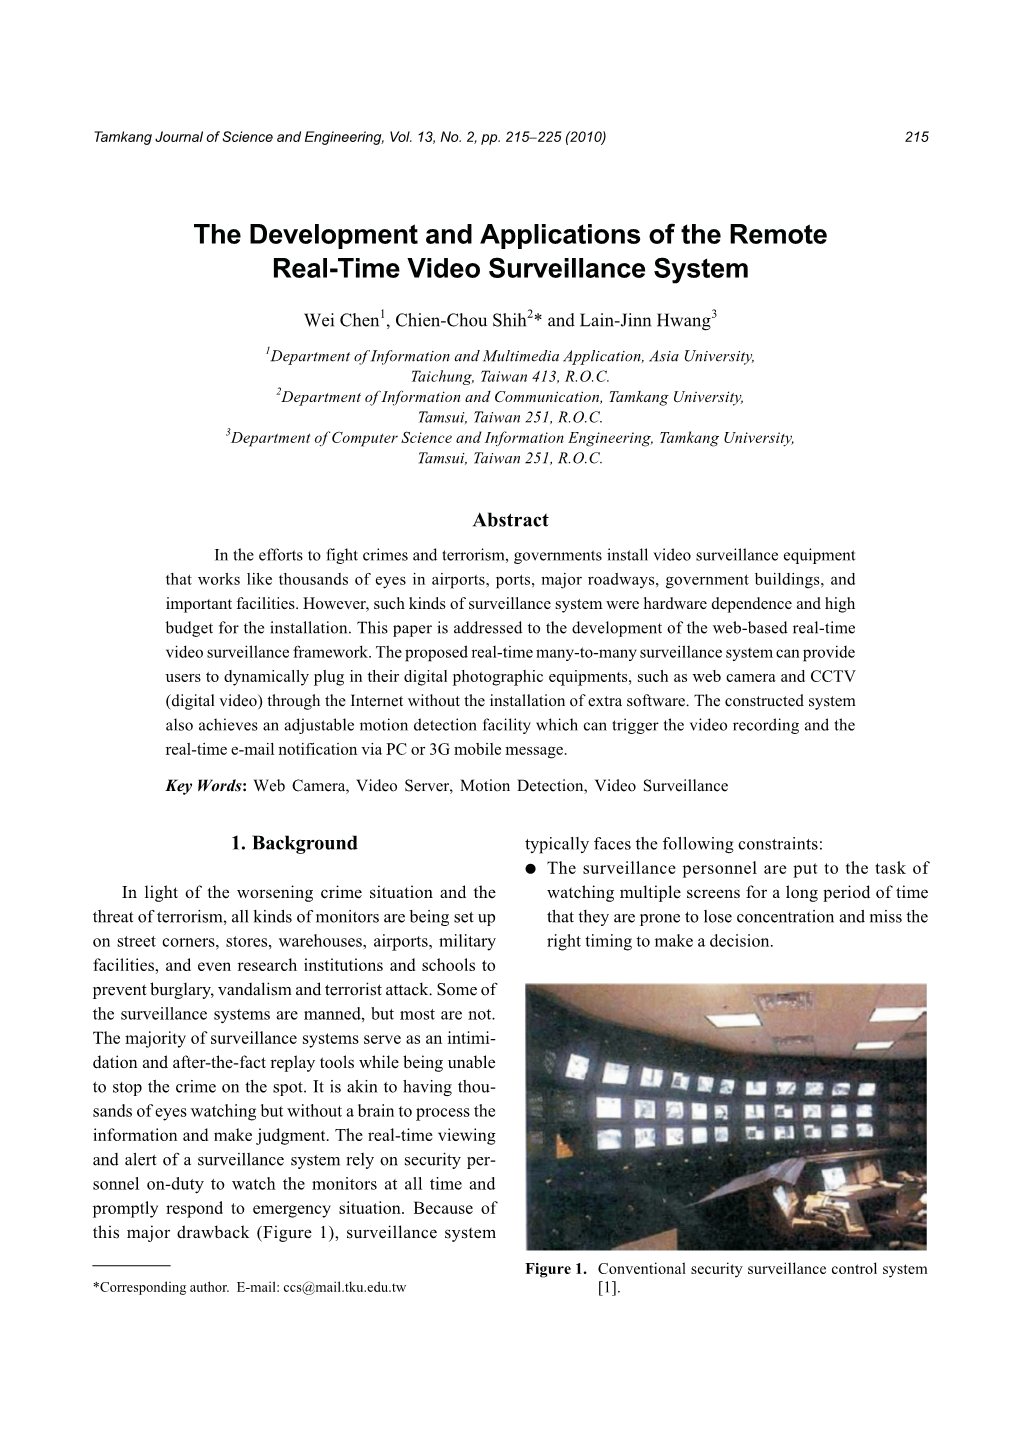 The Development and Applications of the Remote Real-Time Video Surveillance System